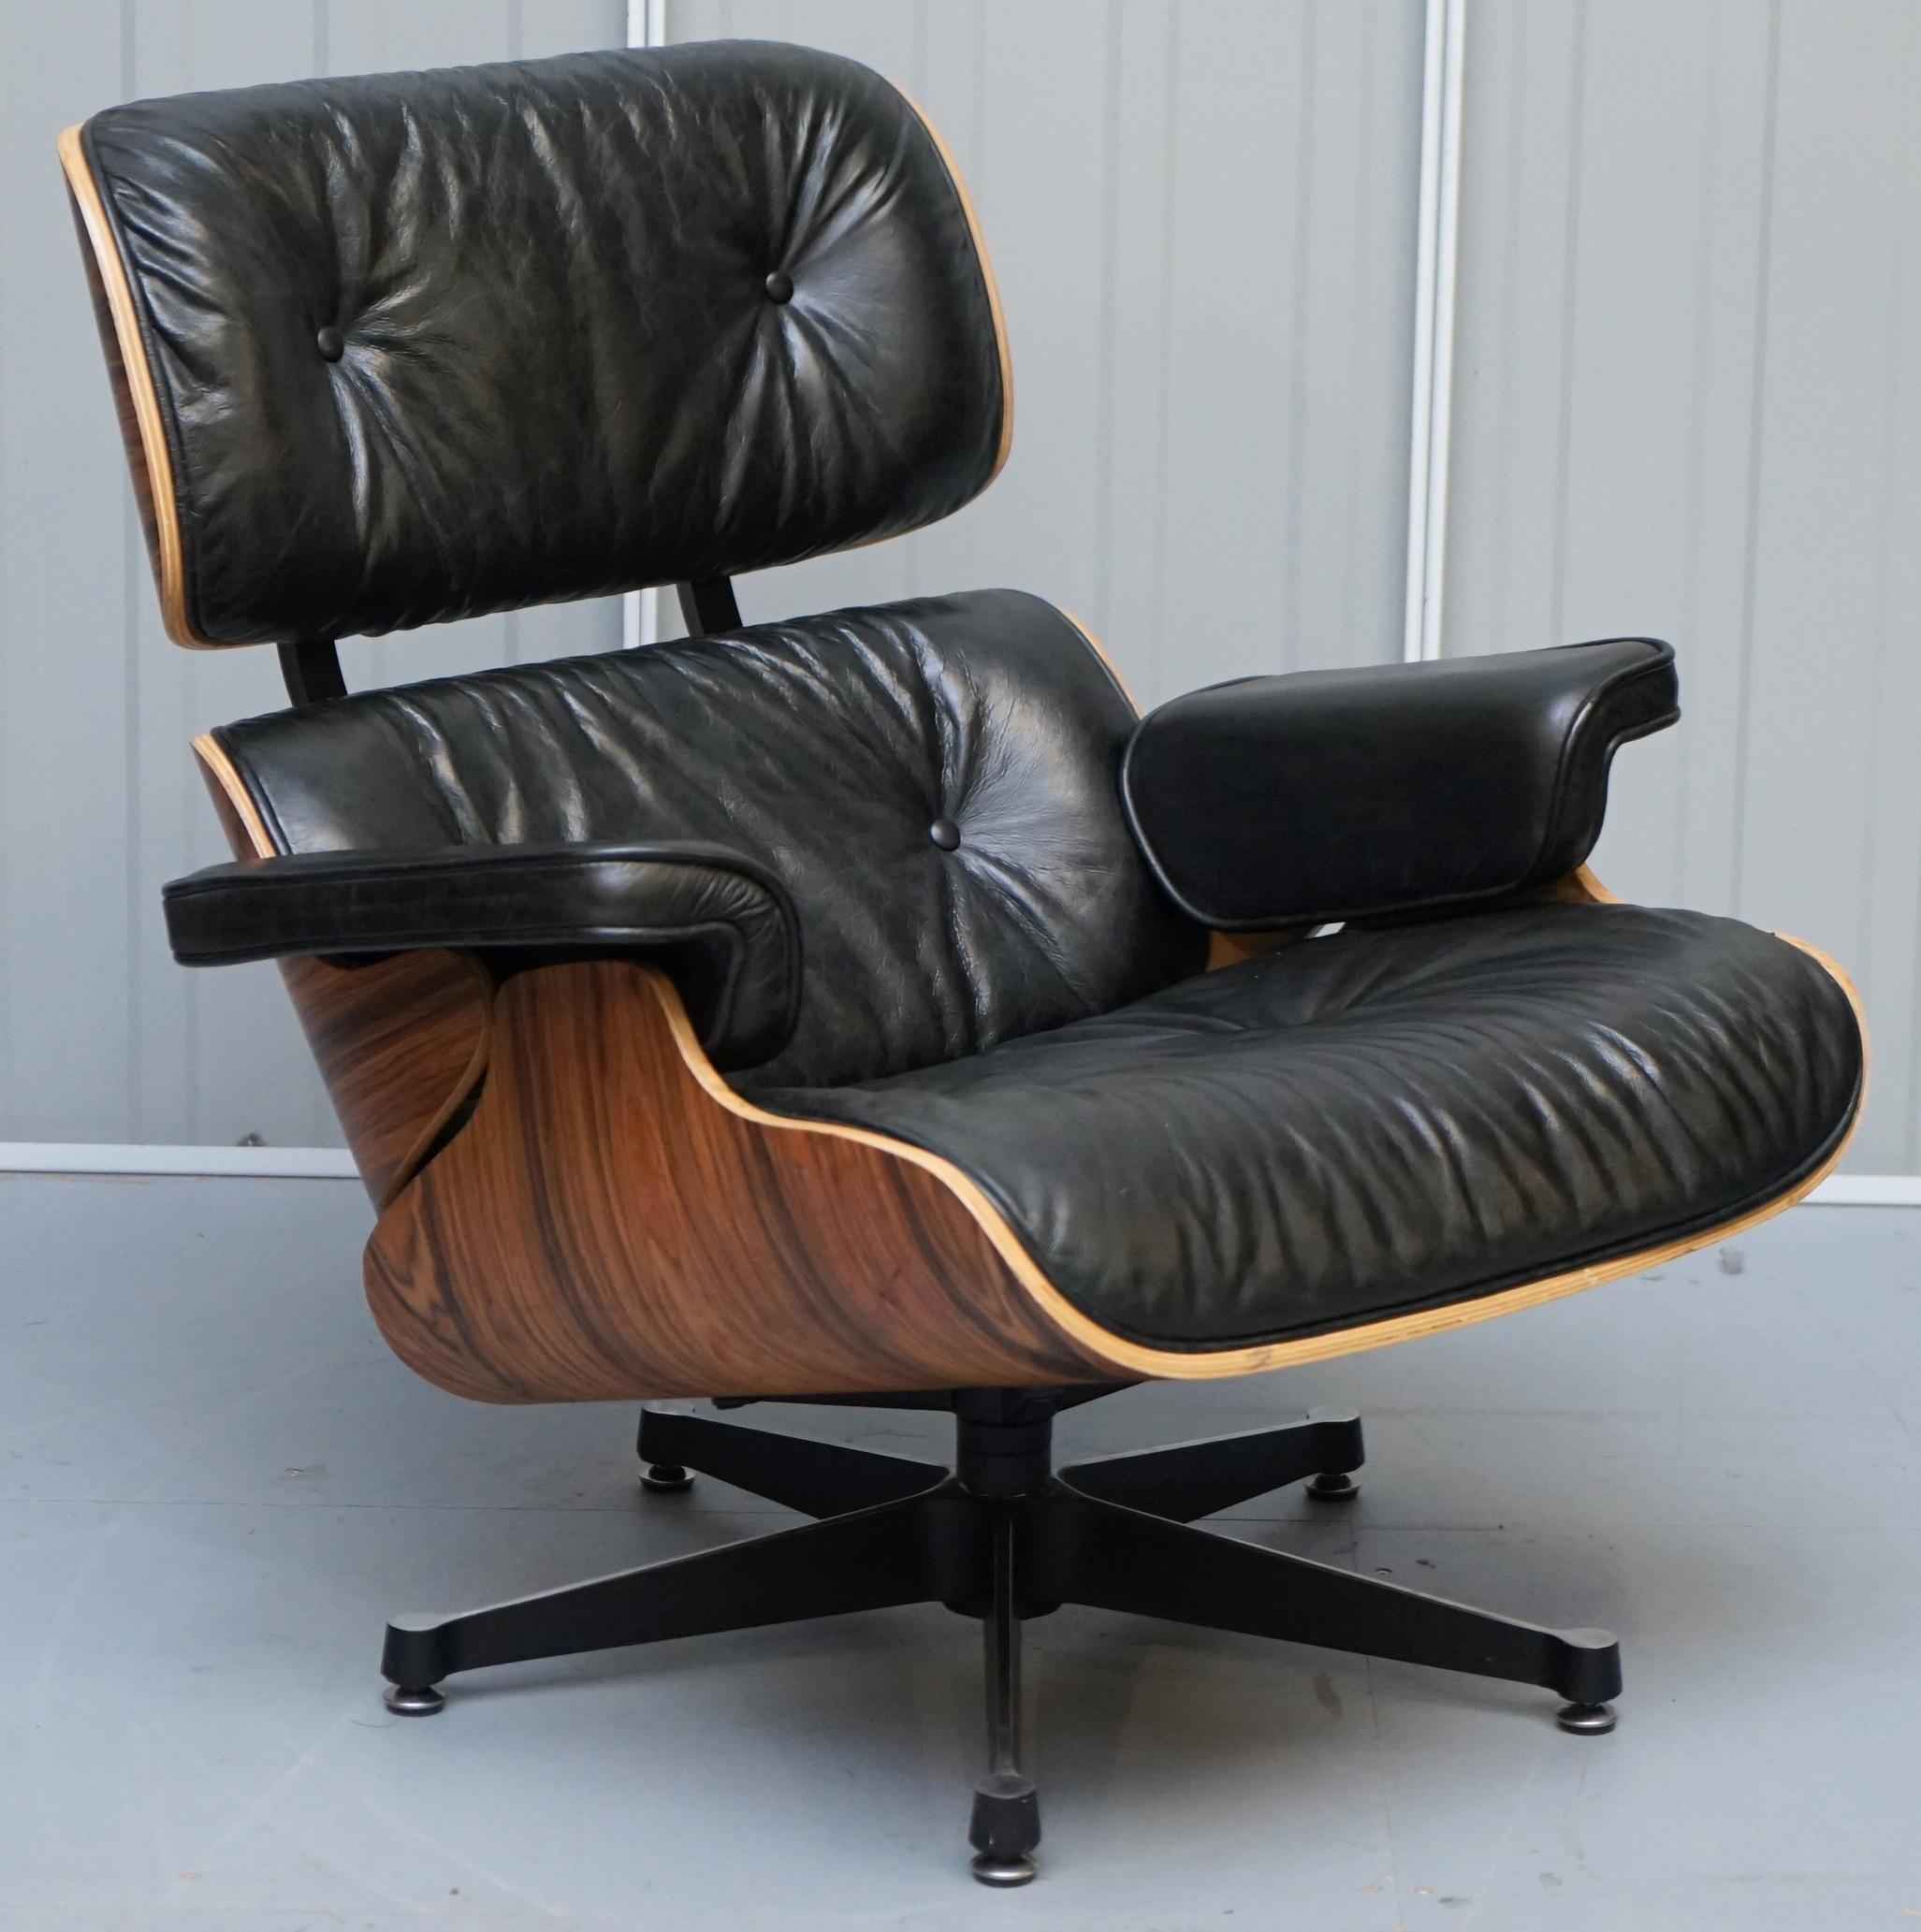 We are delighted to offer for sale this stunning vintage heritage black leather upholstery hardwood framed lounge chair and ottoman

A very good looking well made and decorative lounge chair and ottoman. This has a rare type of leather upholstery,